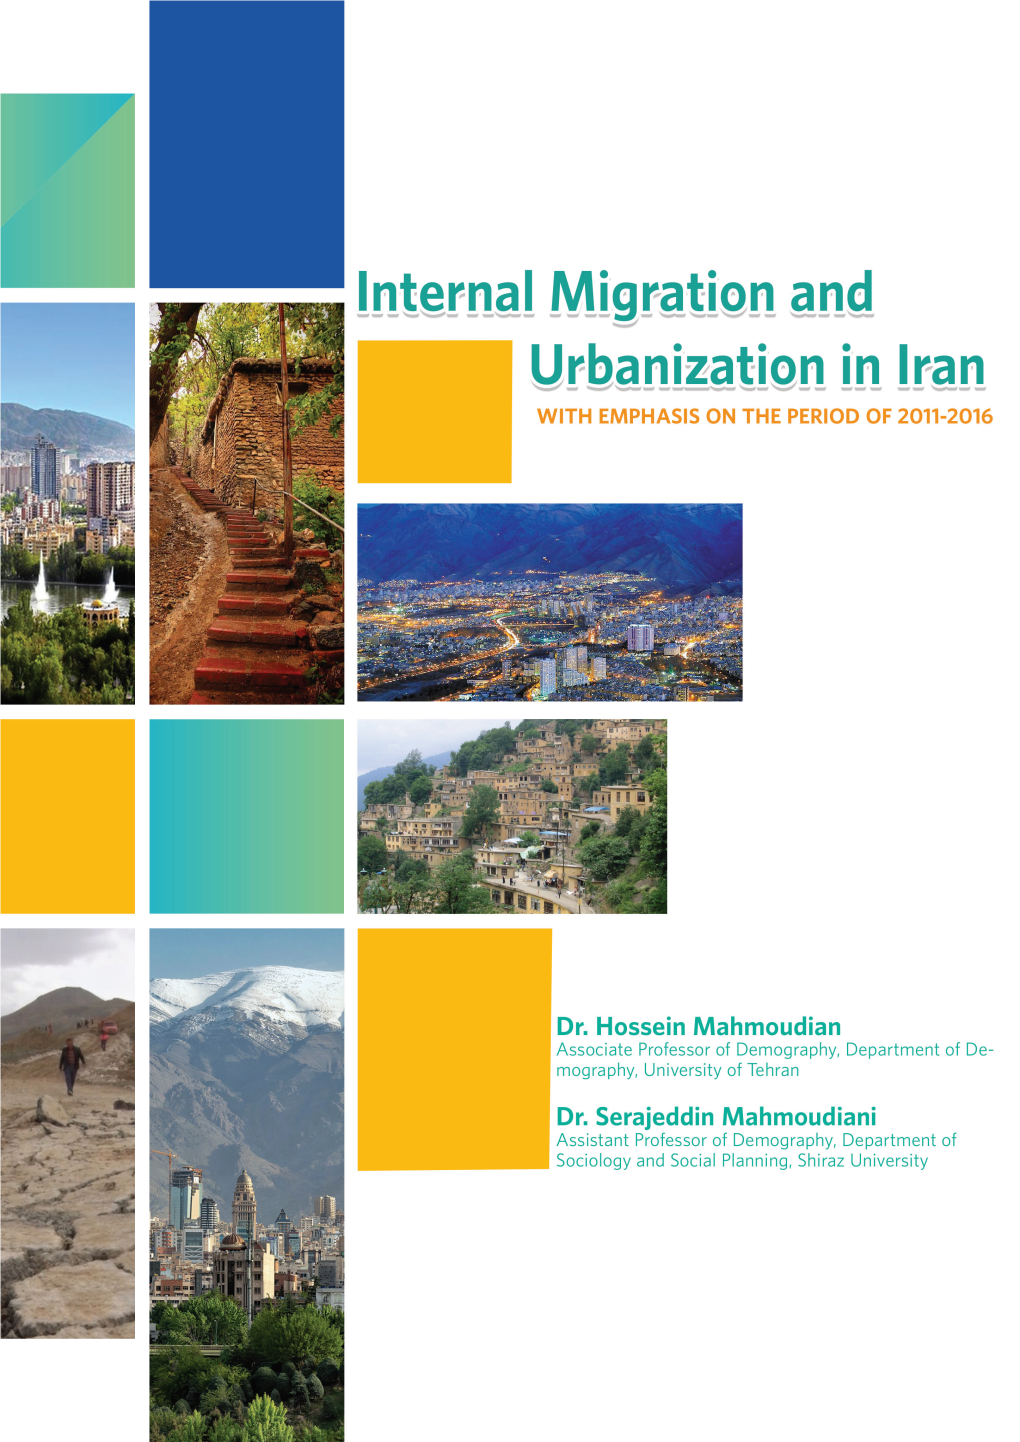 The Status of Internal Migration in Iran